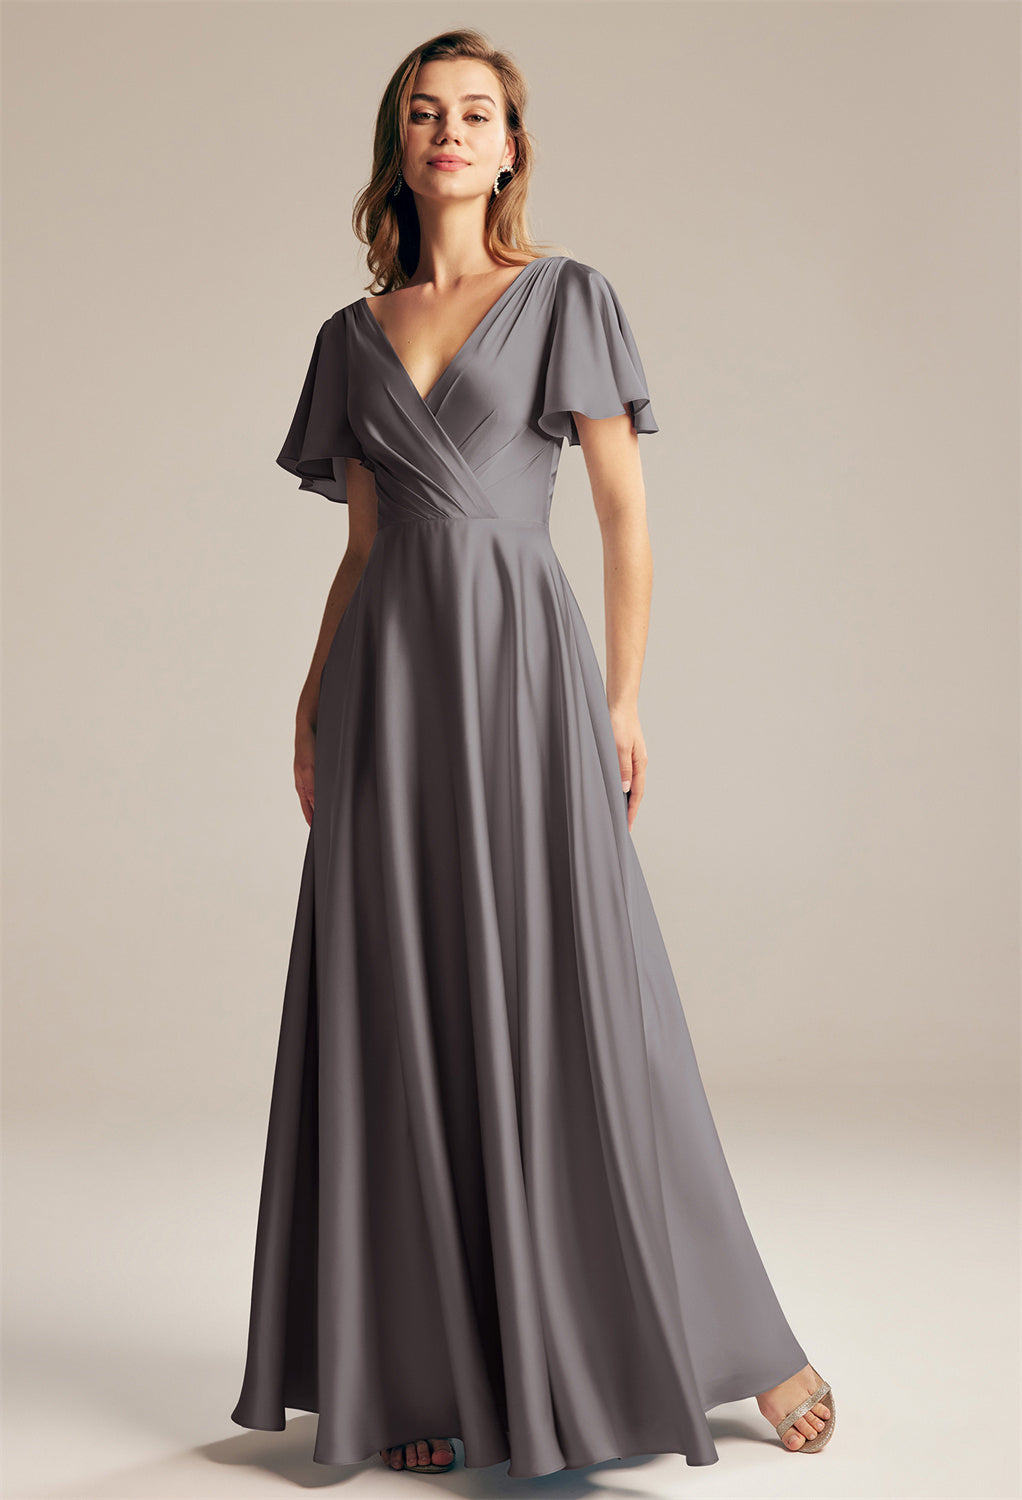 The bridesmaid is wearing a Furst - Satin Charmeuse Bridesmaid Dress - Off The Rack dress by Bergamot Bridal.